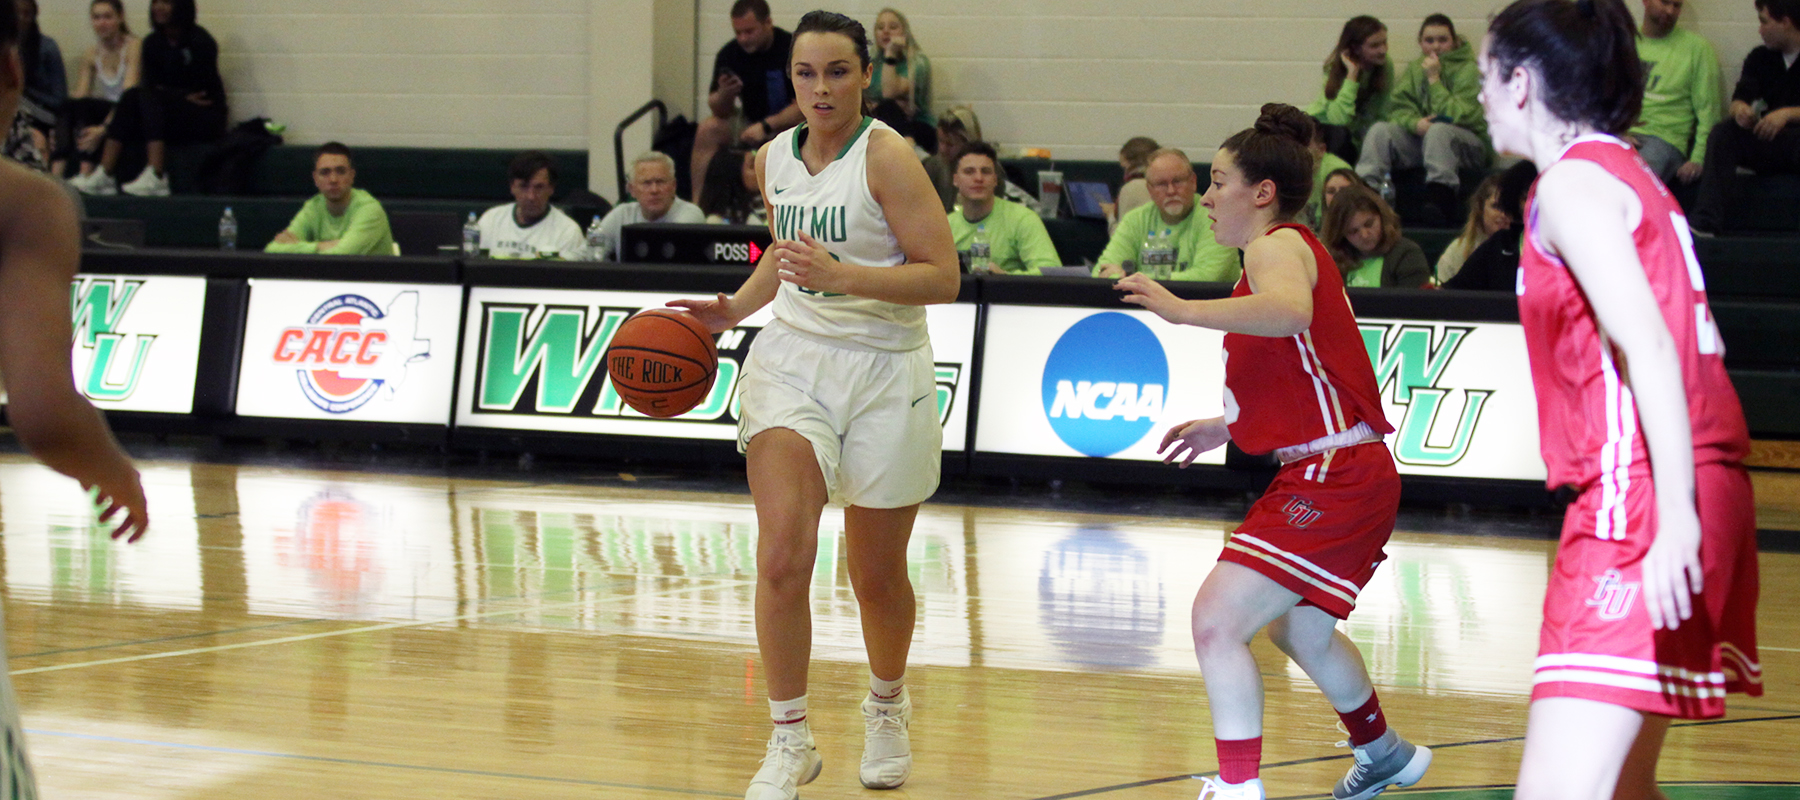 Copyright 209; Wilmington University. All rights reserved. Photo of Macy Robinson who collected a double-double against Caldwell. Photo by MaryKate Rumbaugh. February 2, 2019 vs. Caldwell.